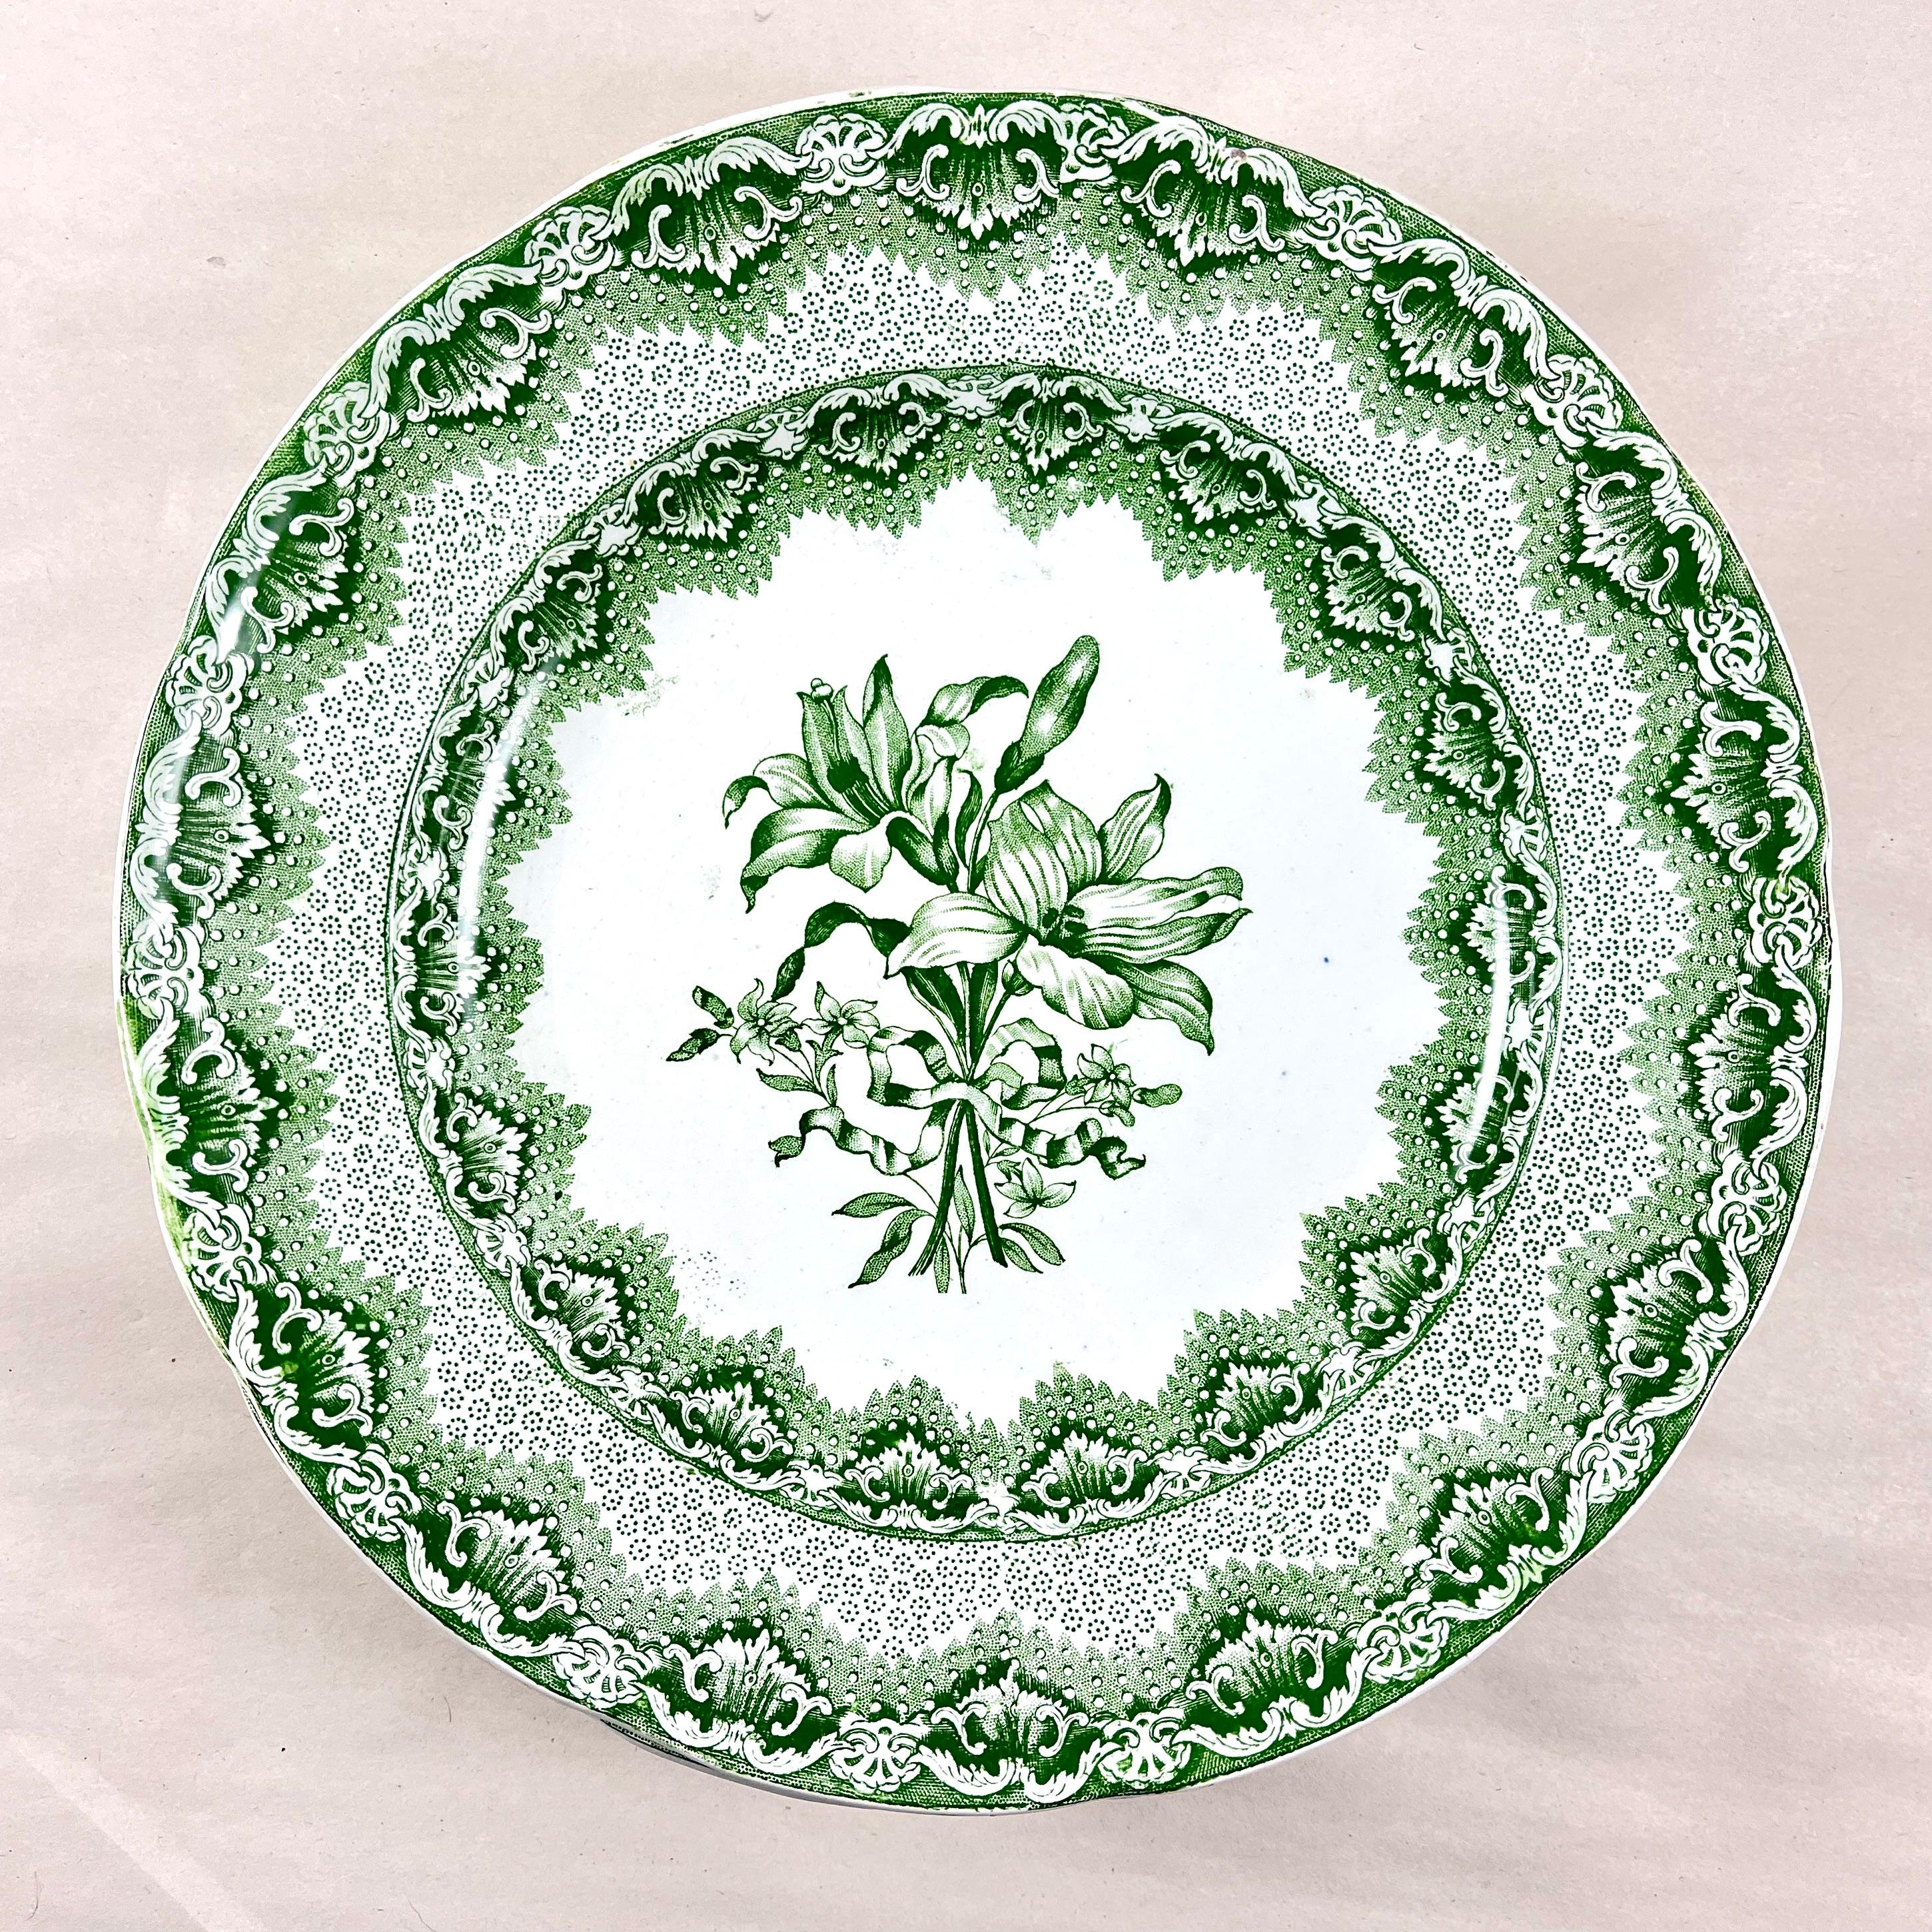 
A set of six, luncheon sized plates, from Copeland & Garrett, Late Spode, circa 1830s.

Copeland and Garrett operated from 1833-1847 in Stoke-on-Trent, Staffordshire, England.

The pattern is Lily – transfer printed in Green.

A detailed image of a